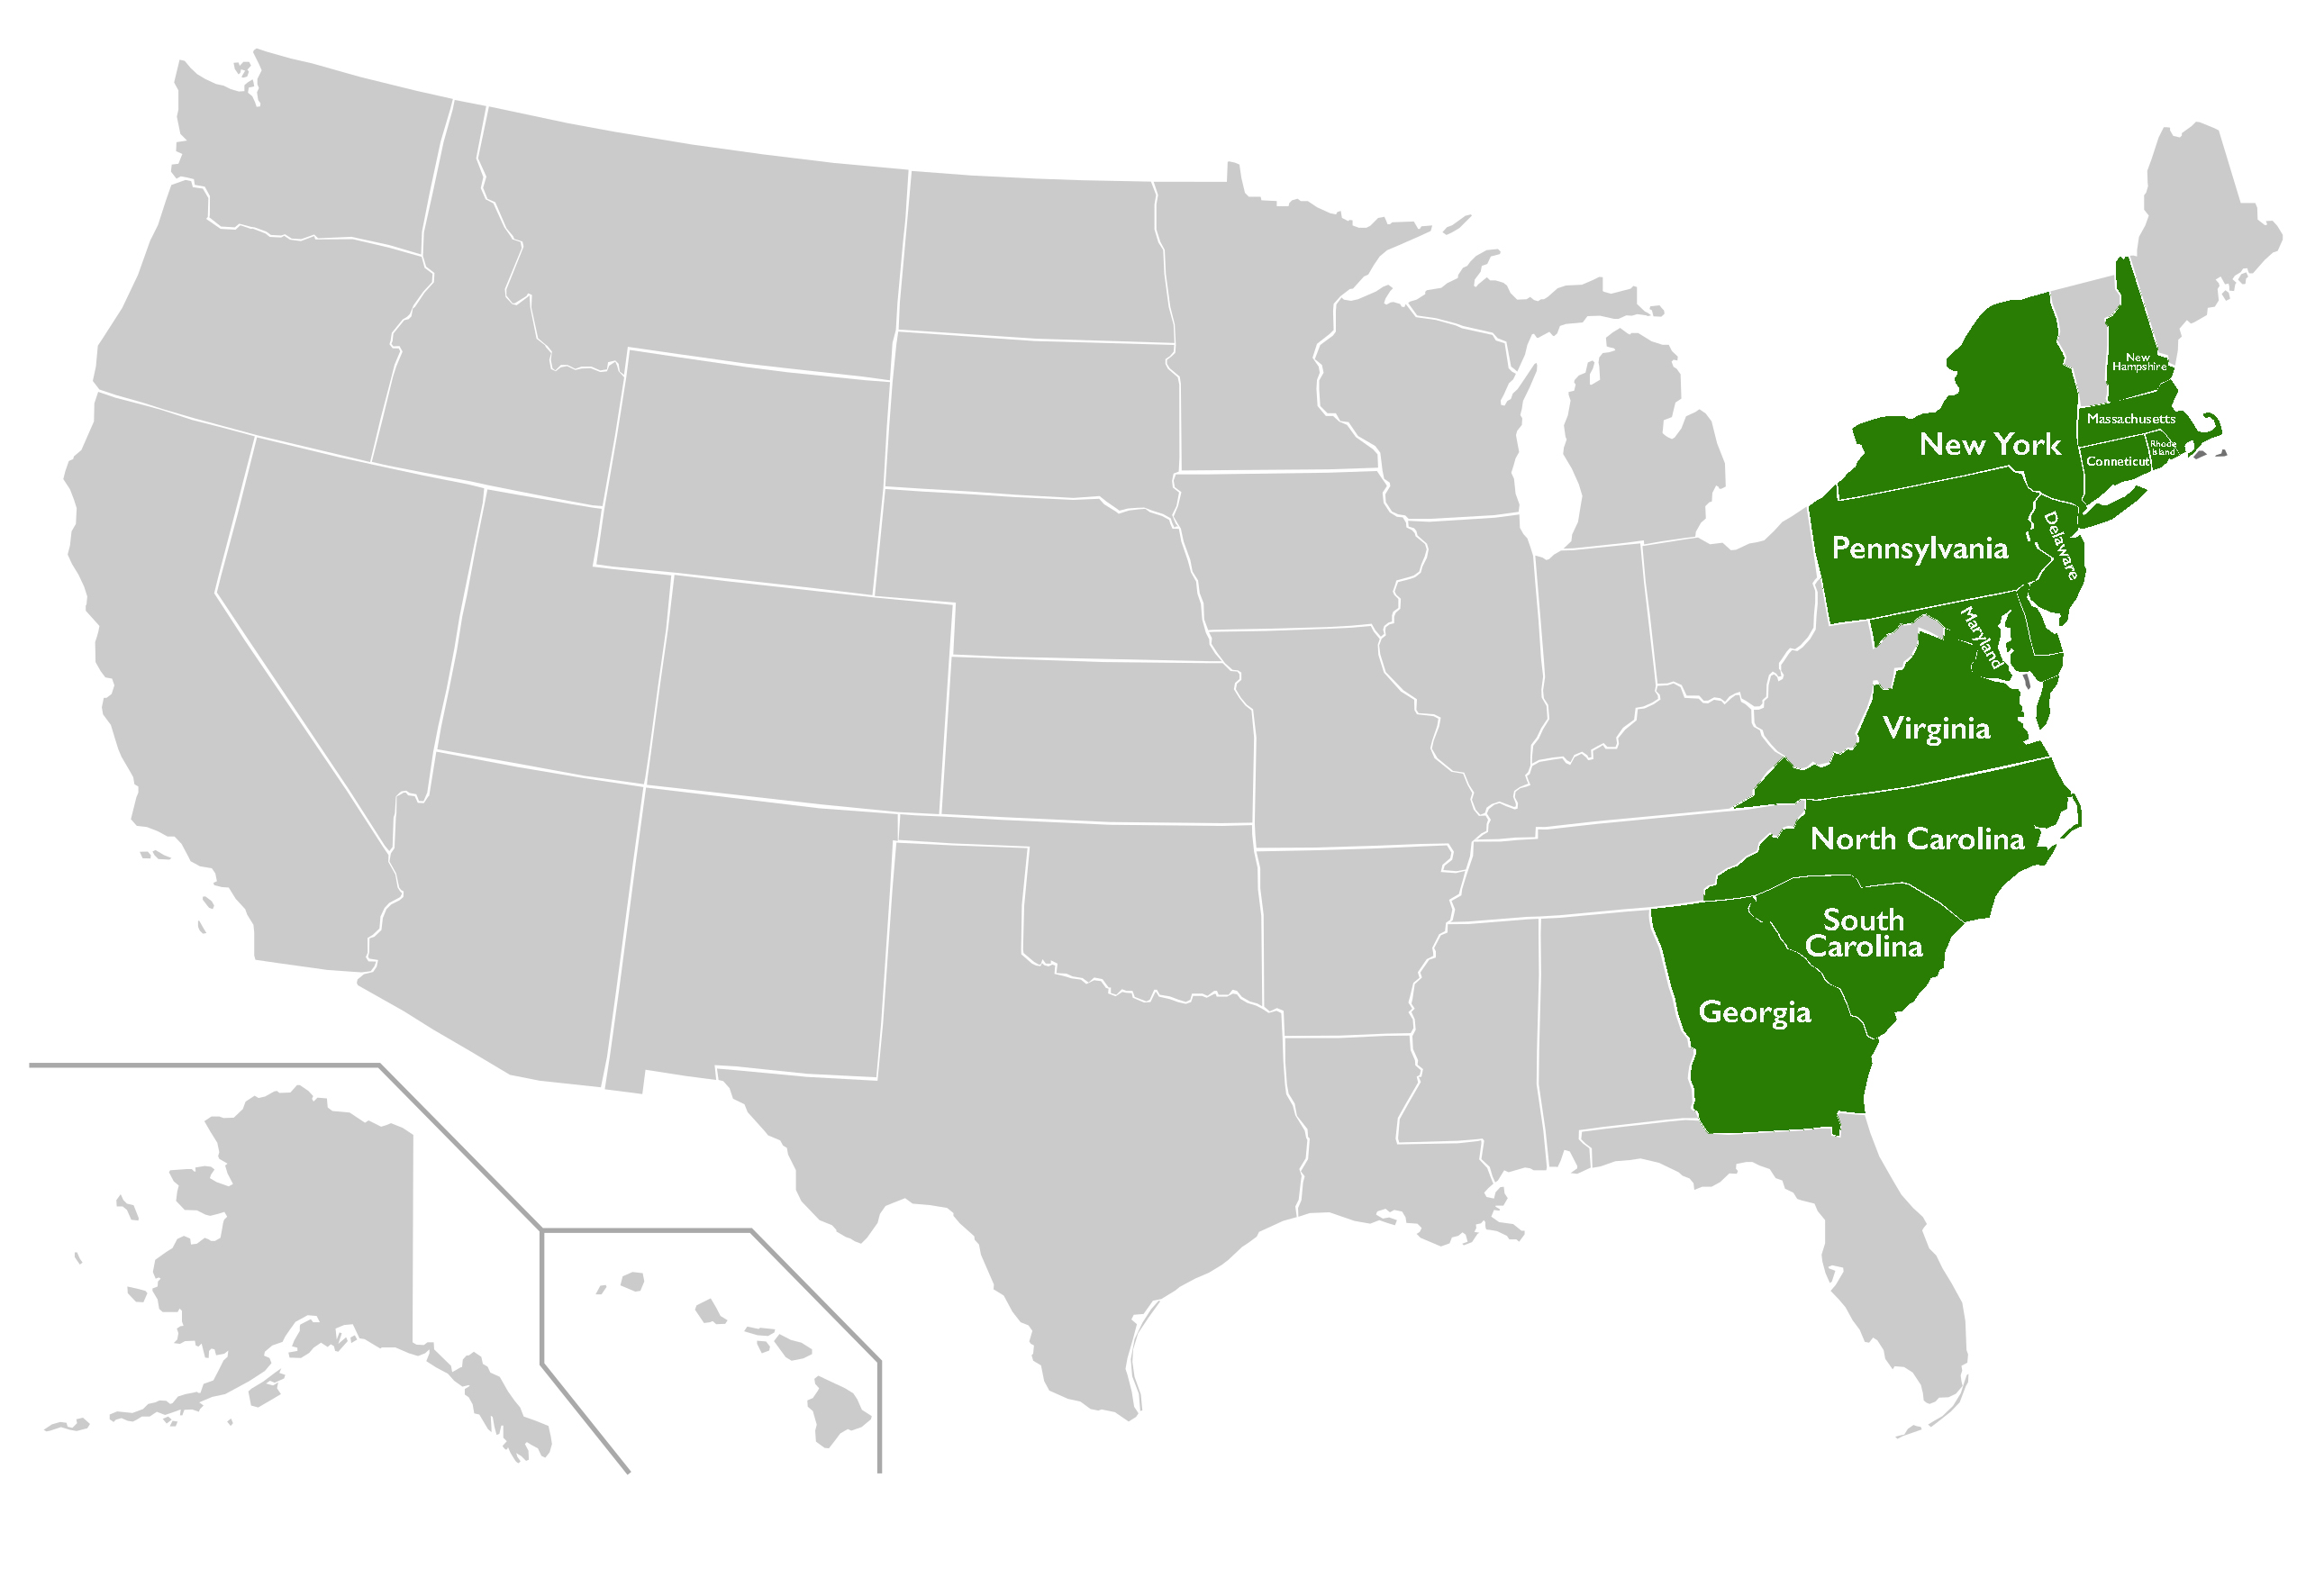 Map of the 13 American Colonies (map adapted from Connormah, CC BY-SA 3.0)